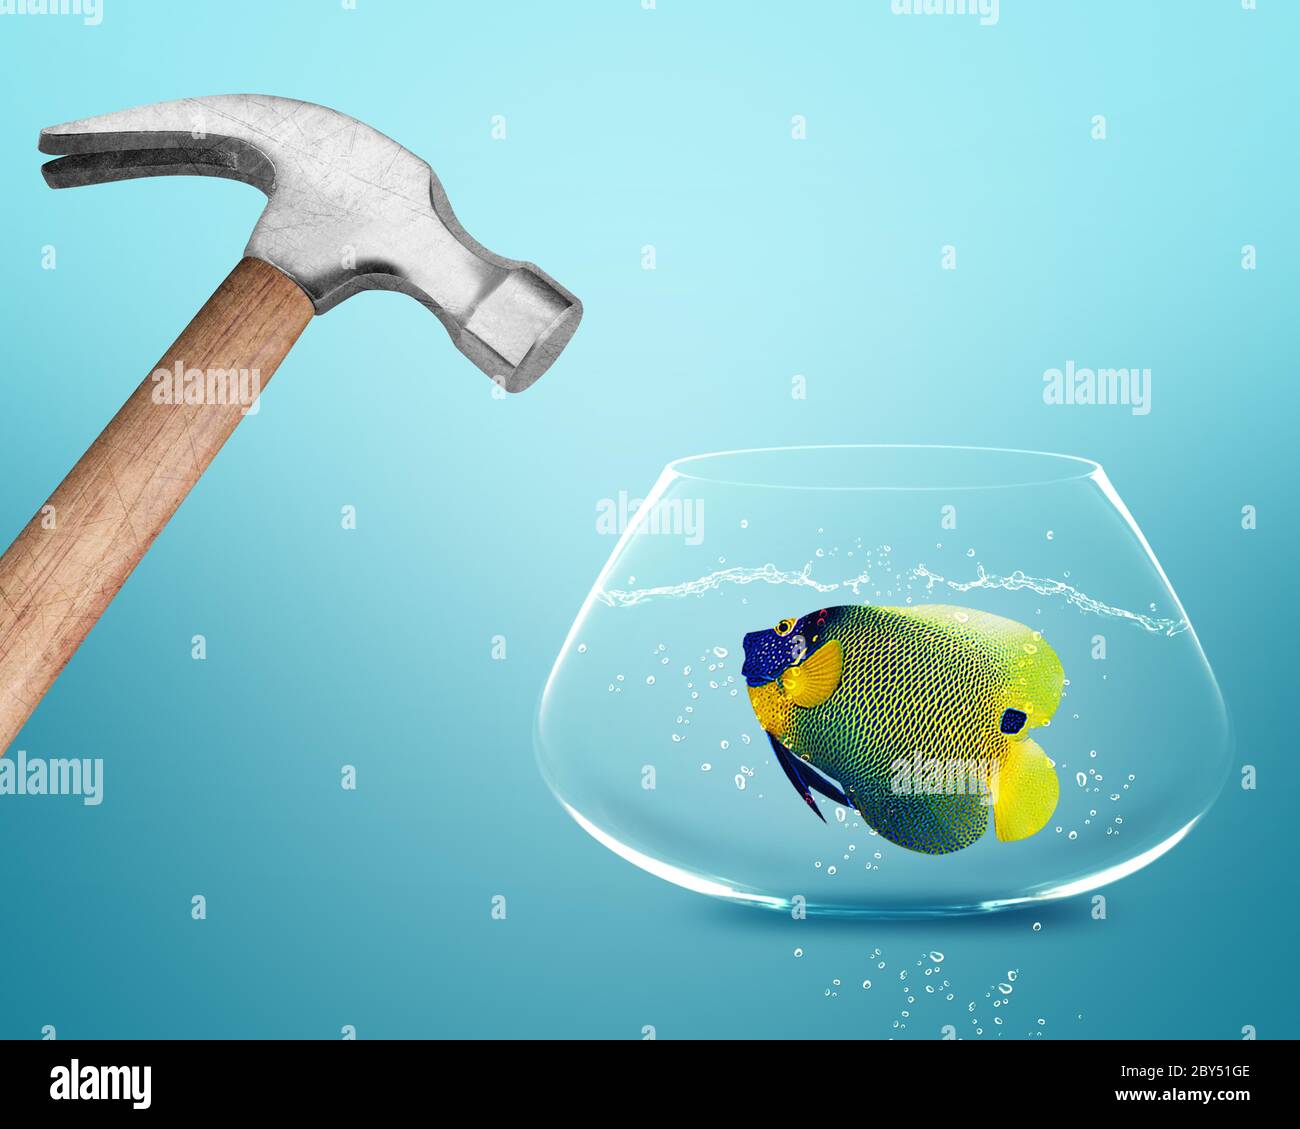 Fish Hammer High Resolution Stock Photography and Images - Alamy